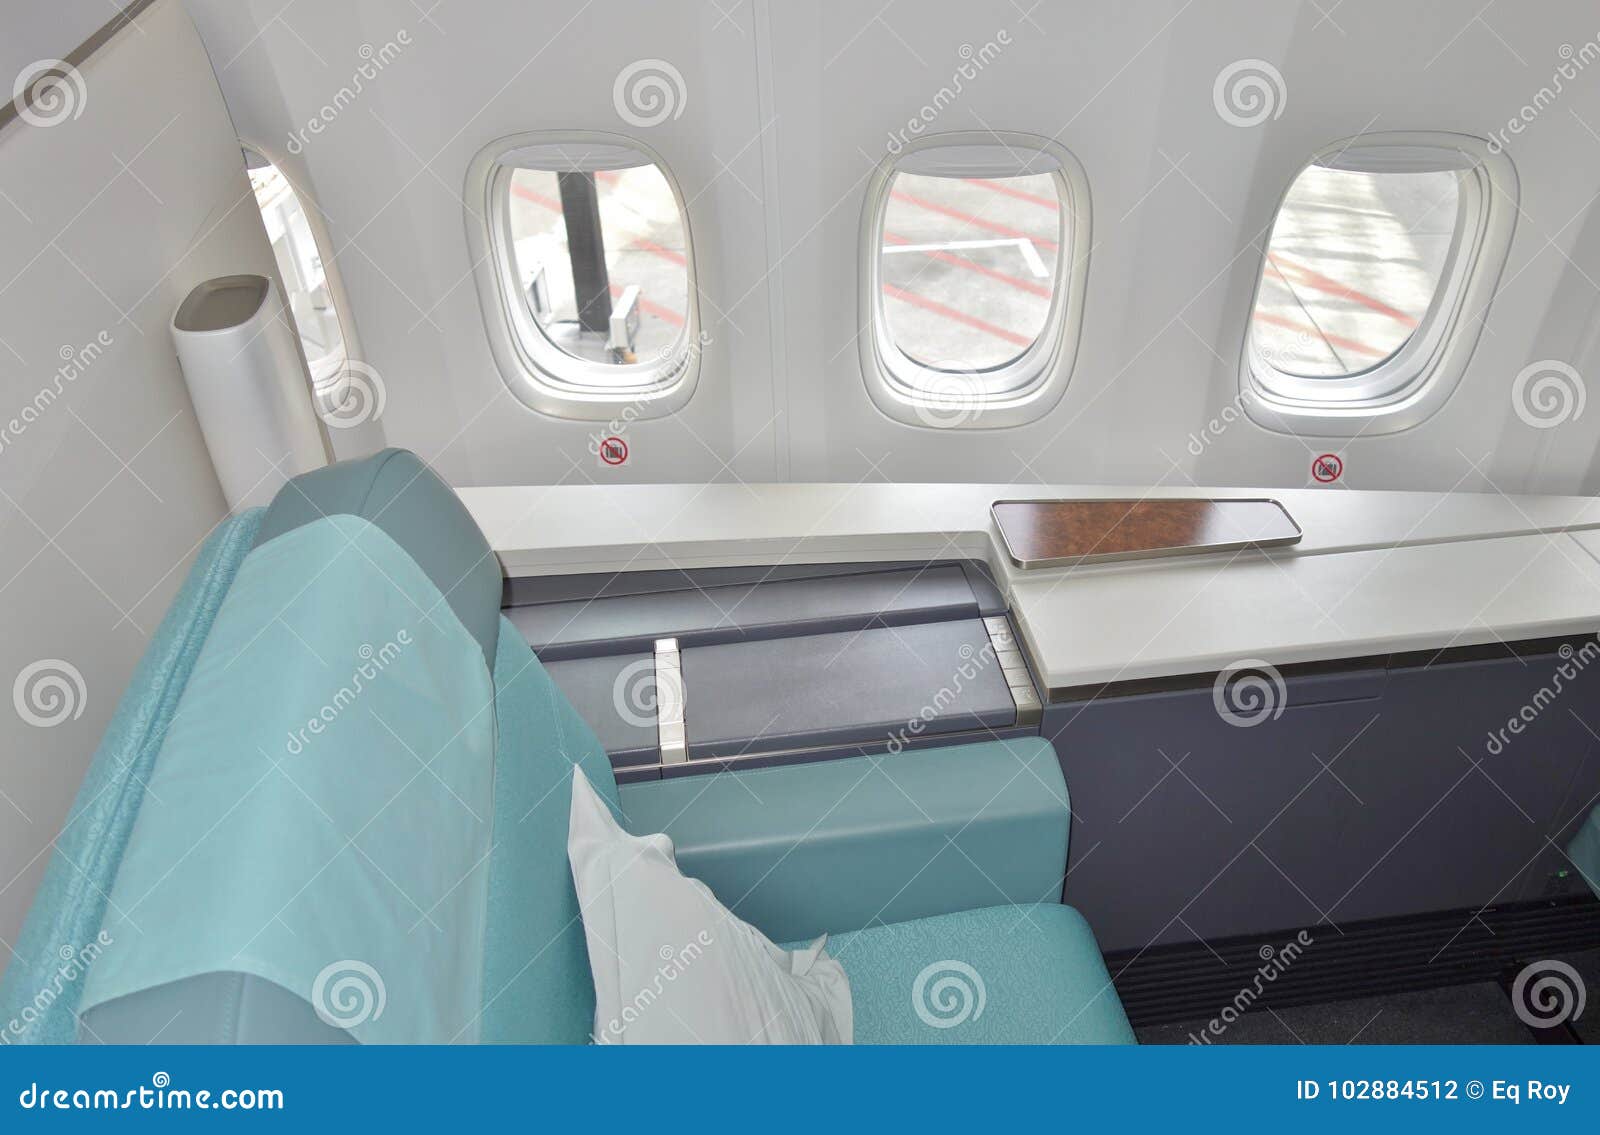 The First Class Cabin Of A Korean Airlines Ke Boeing 747 8